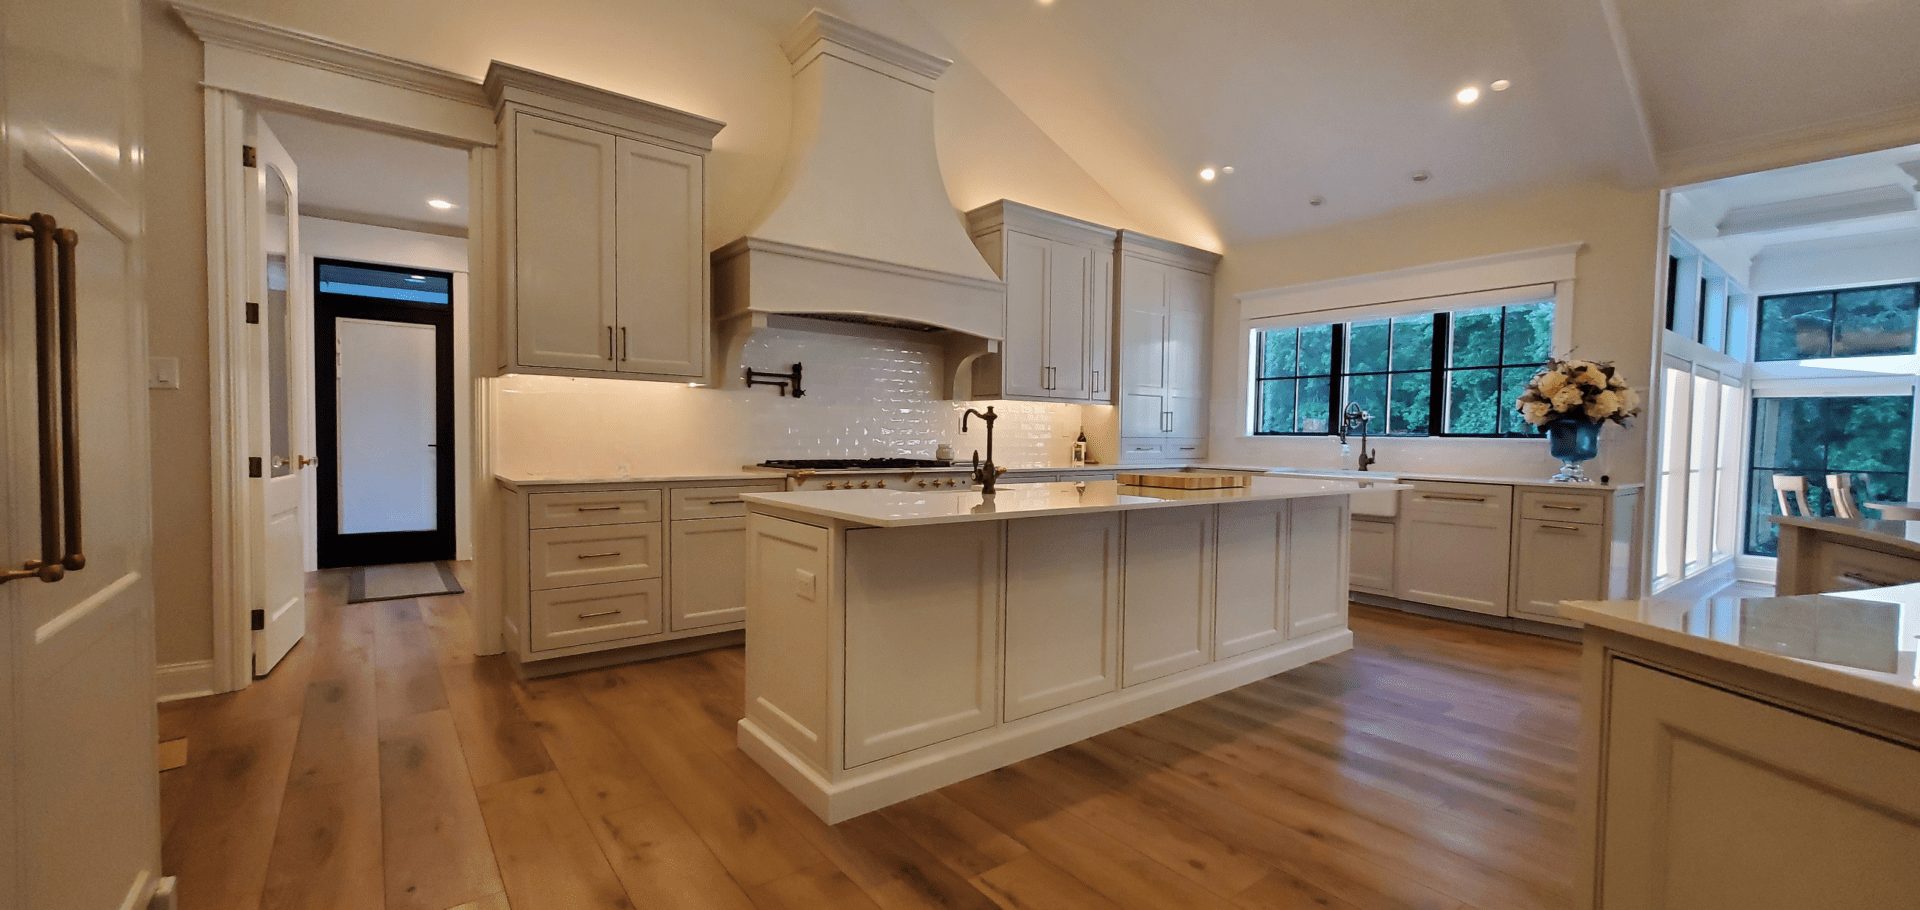 An L Shape Kitchen Cabinet Space With an Island